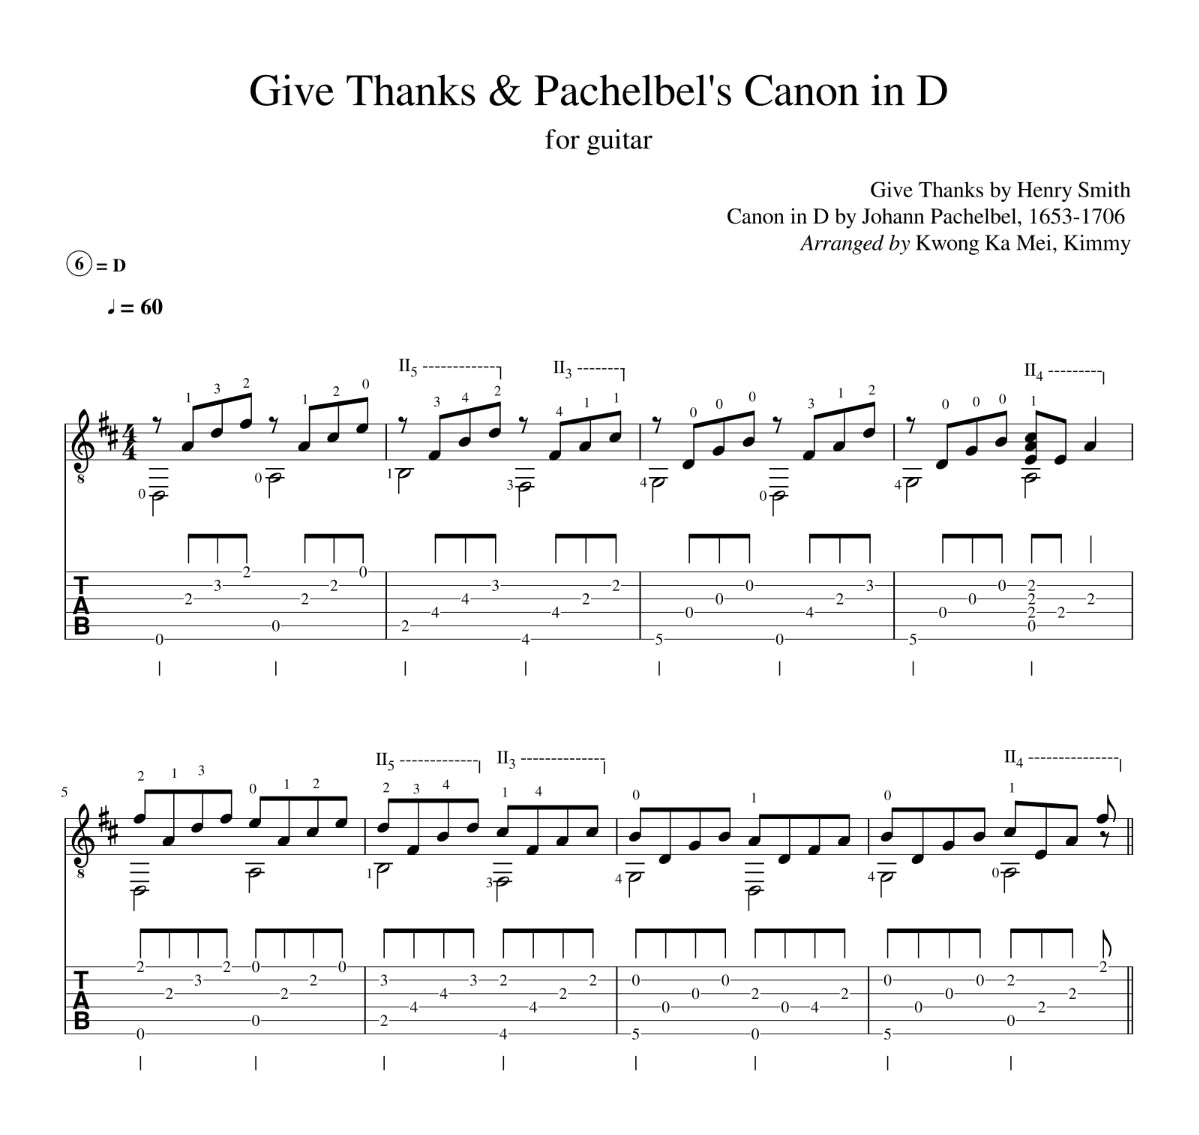 [Sheet+Tab] Give Thanks & Pachelbel's Canon in D